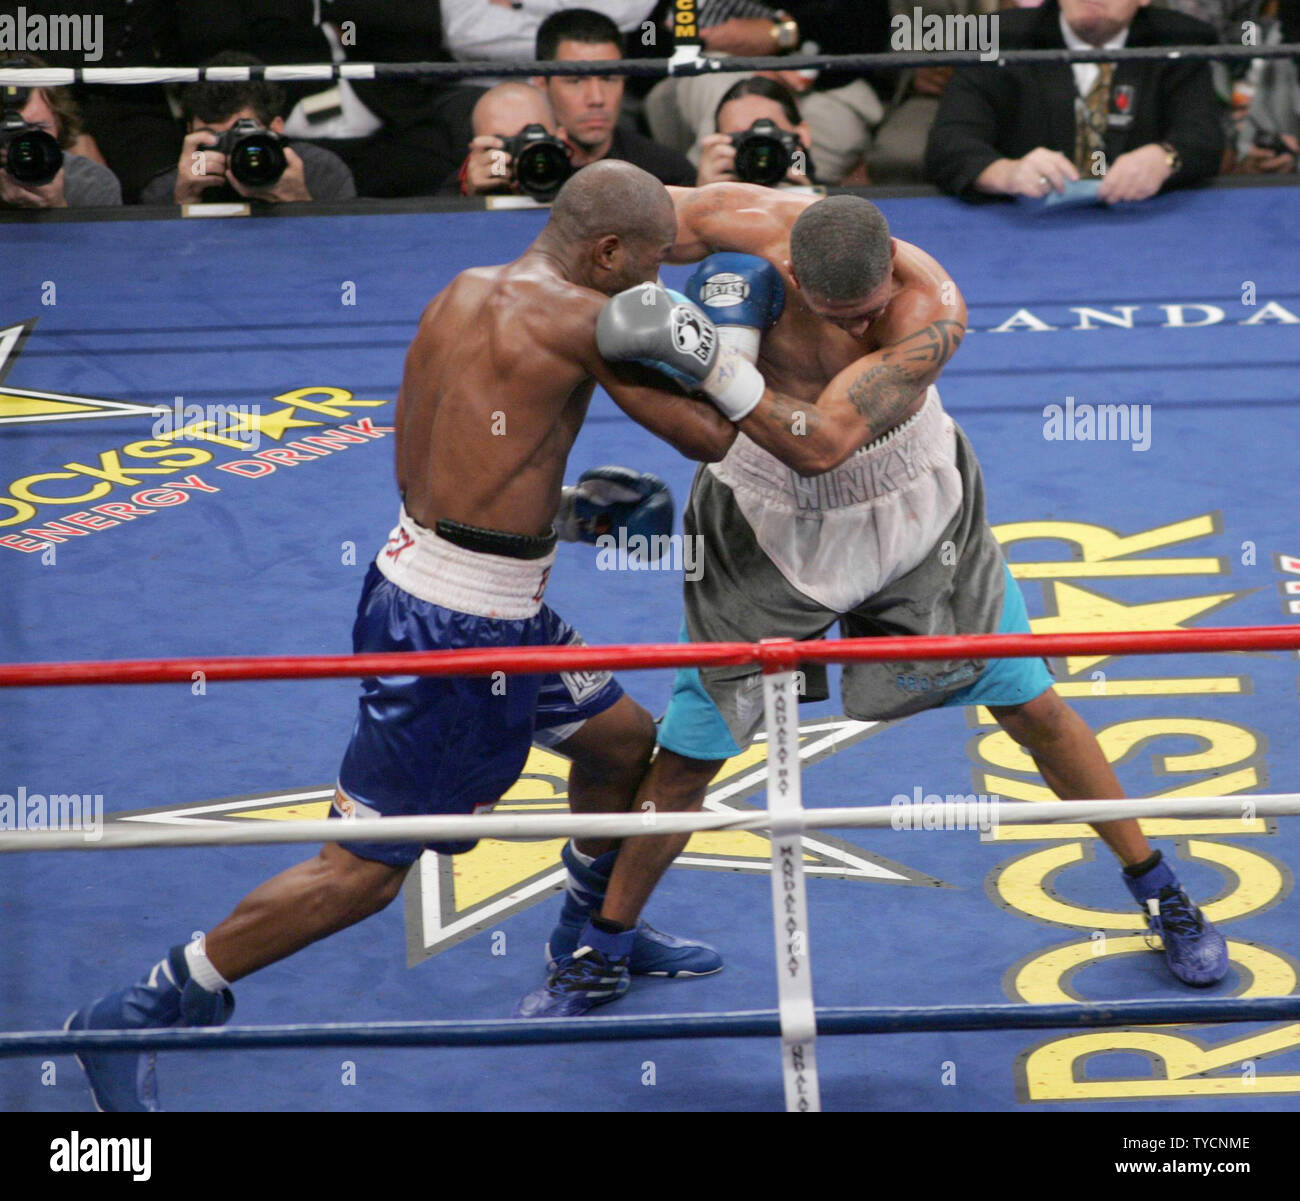 Challenger Winky Wright (R) and champion Bernard Hopkins square off during the Ring Magazine Light Heavyweight title fight at Mandalay Bay in Las Vegas on July 21, 2007. Hopkins won by decision.  (UPI Photo/Roger Williams) Stock Photo